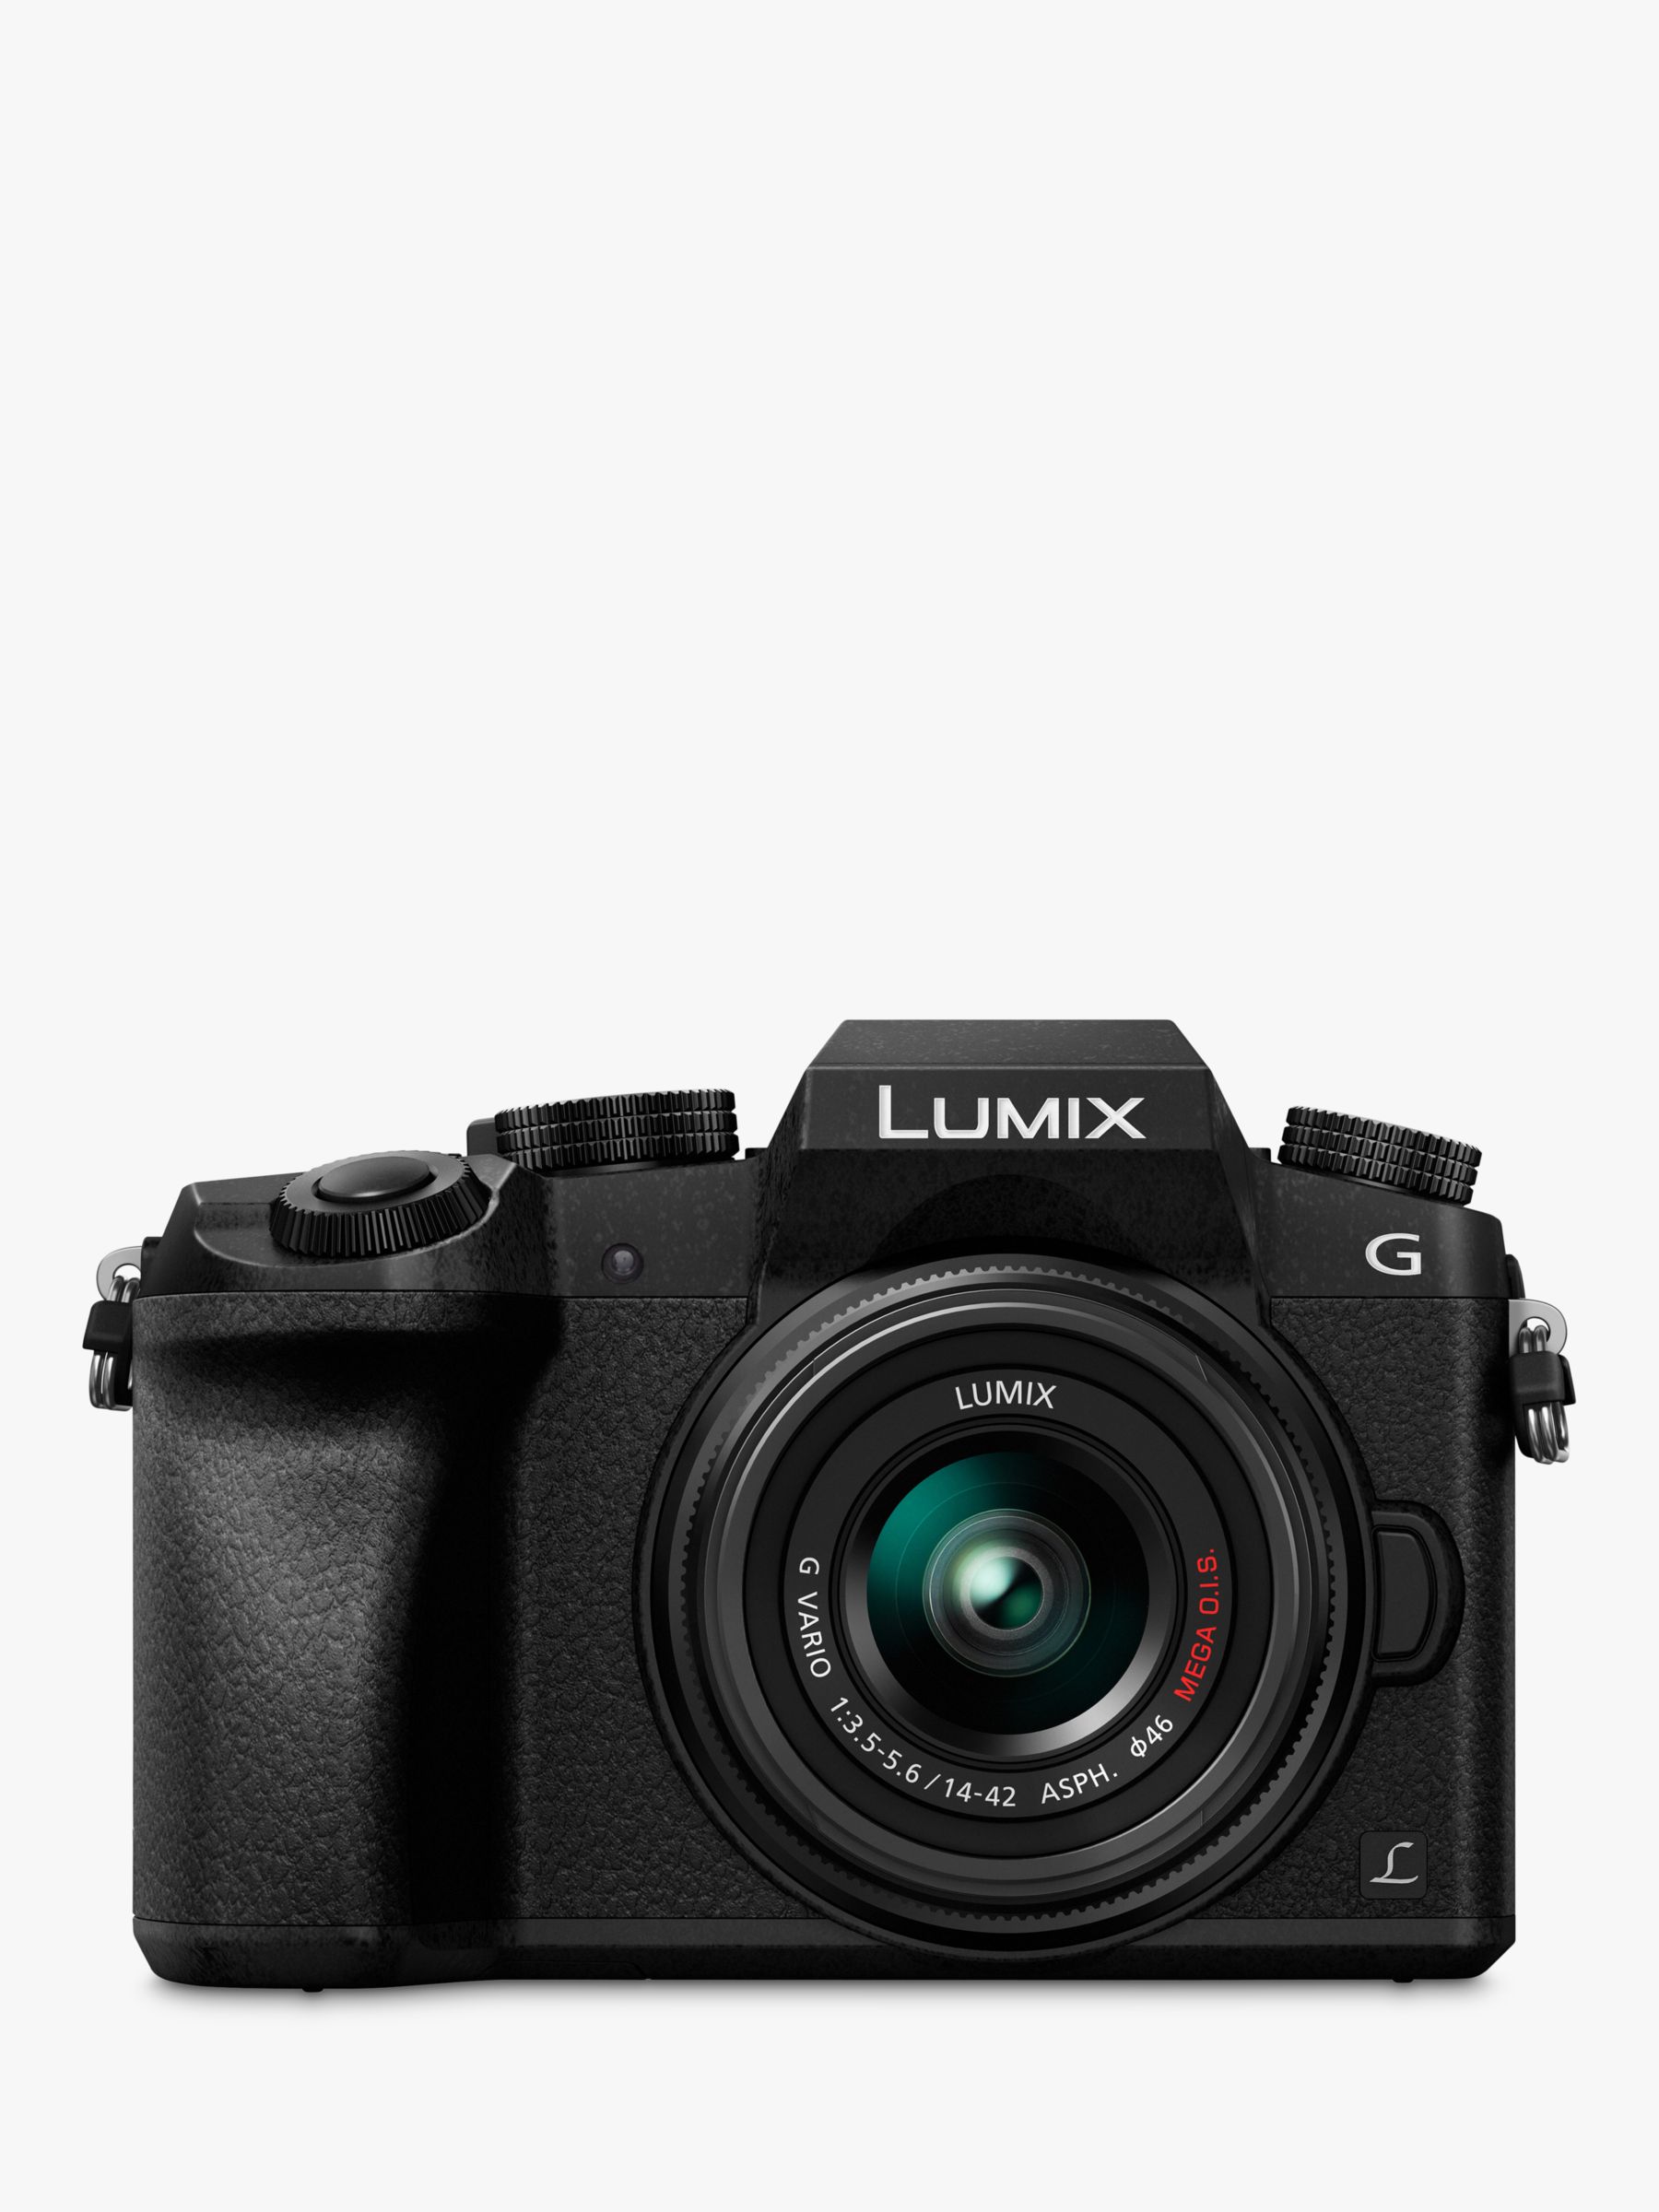 Image of Panasonic Lumix DMCG7 Compact System Camera with 1442mm OIS Lens 4K 16MP 4x Digital Zoom WiFi OLED Viewfinder 3 Tilt Screen Display